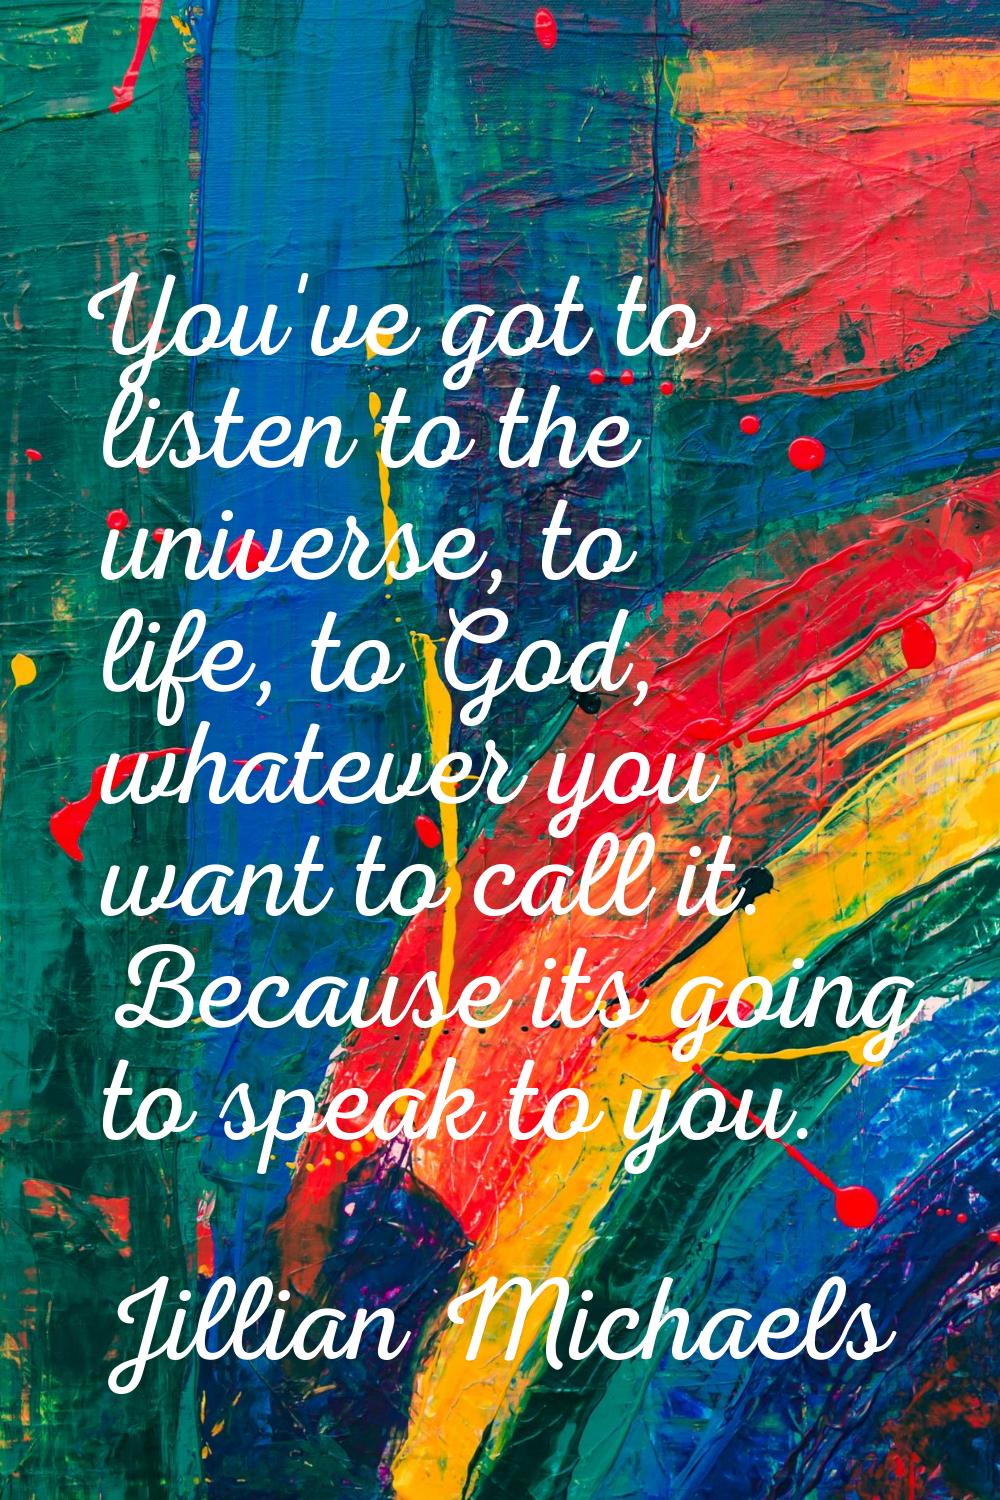 You've got to listen to the universe, to life, to God, whatever you want to call it. Because its go